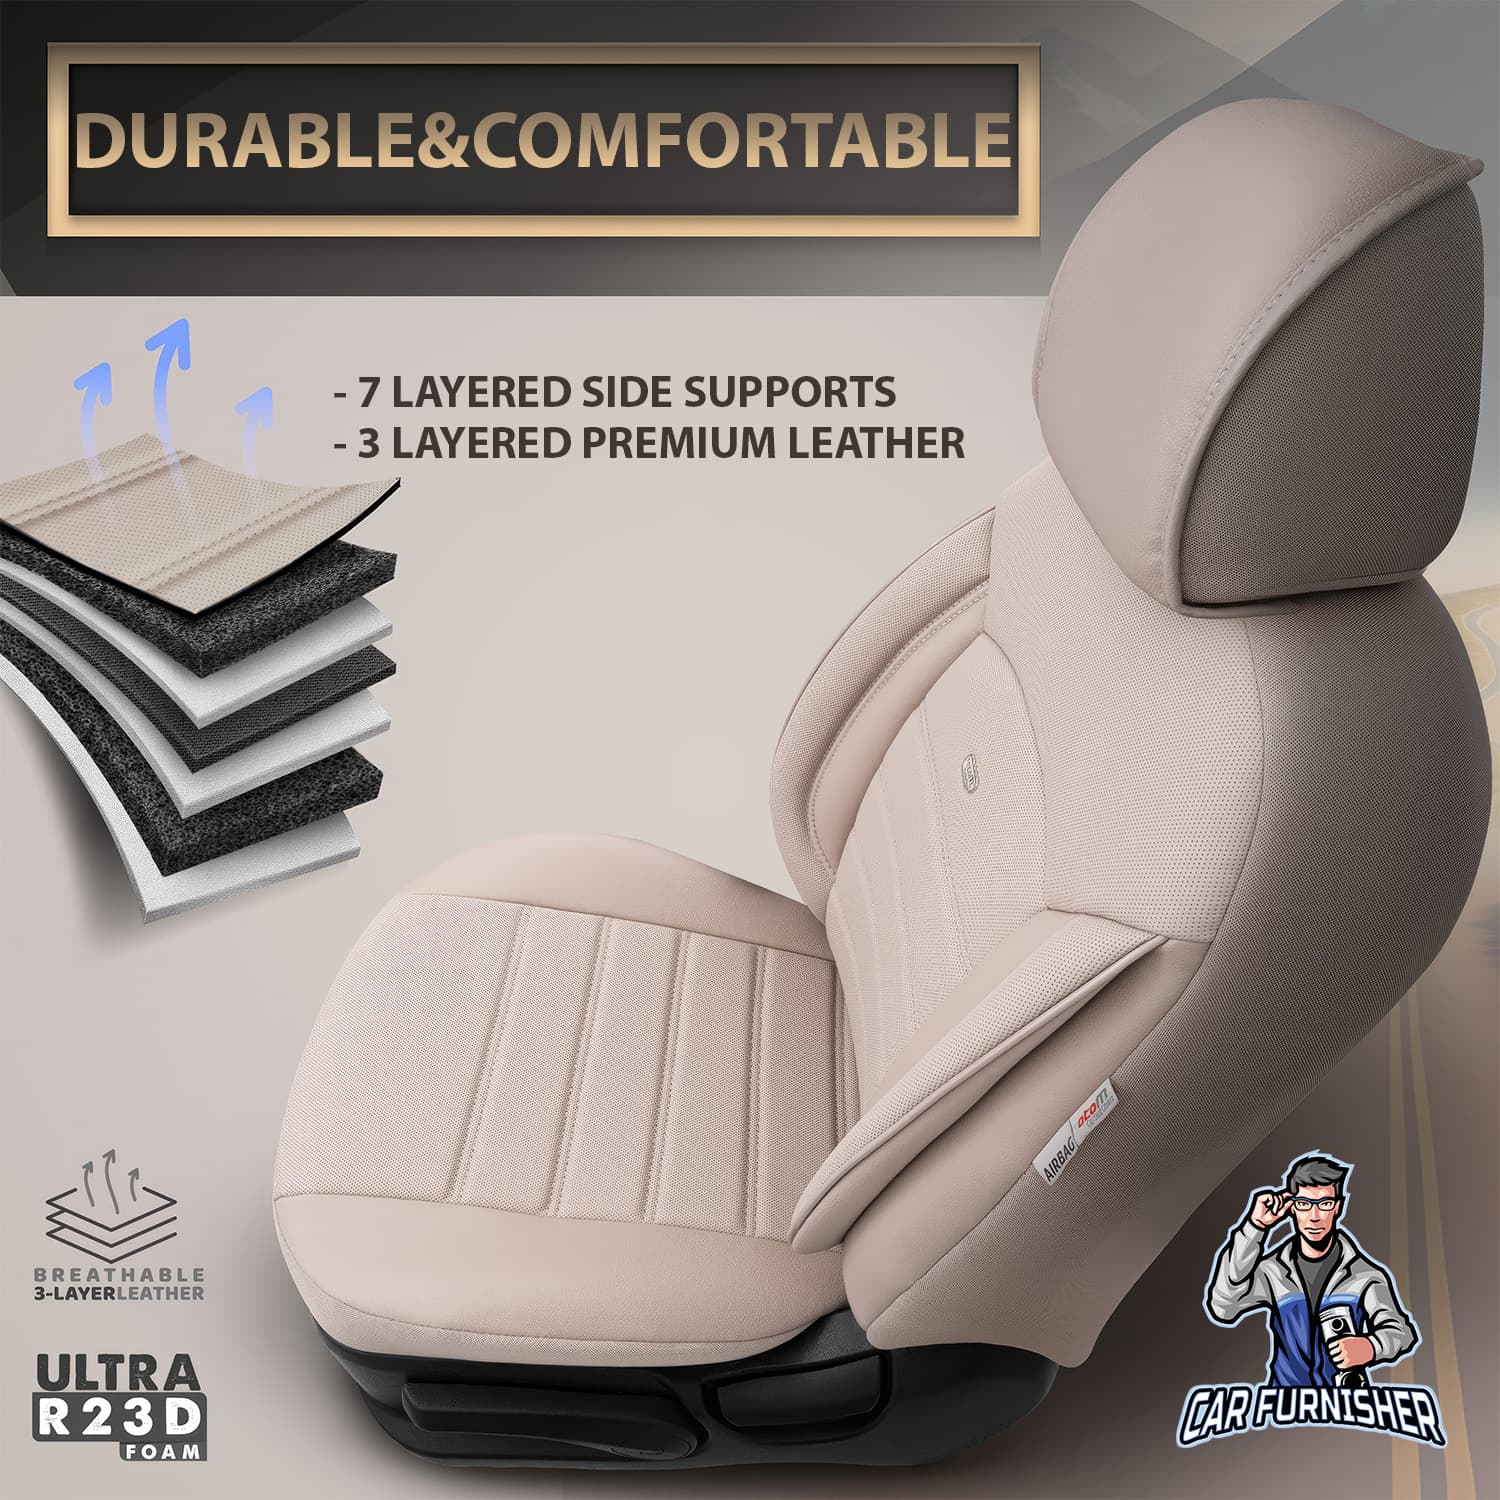 Mercedes 190 Seat Covers Inspire Design Beige 5 Seats + Headrests (Full Set) Full Leather